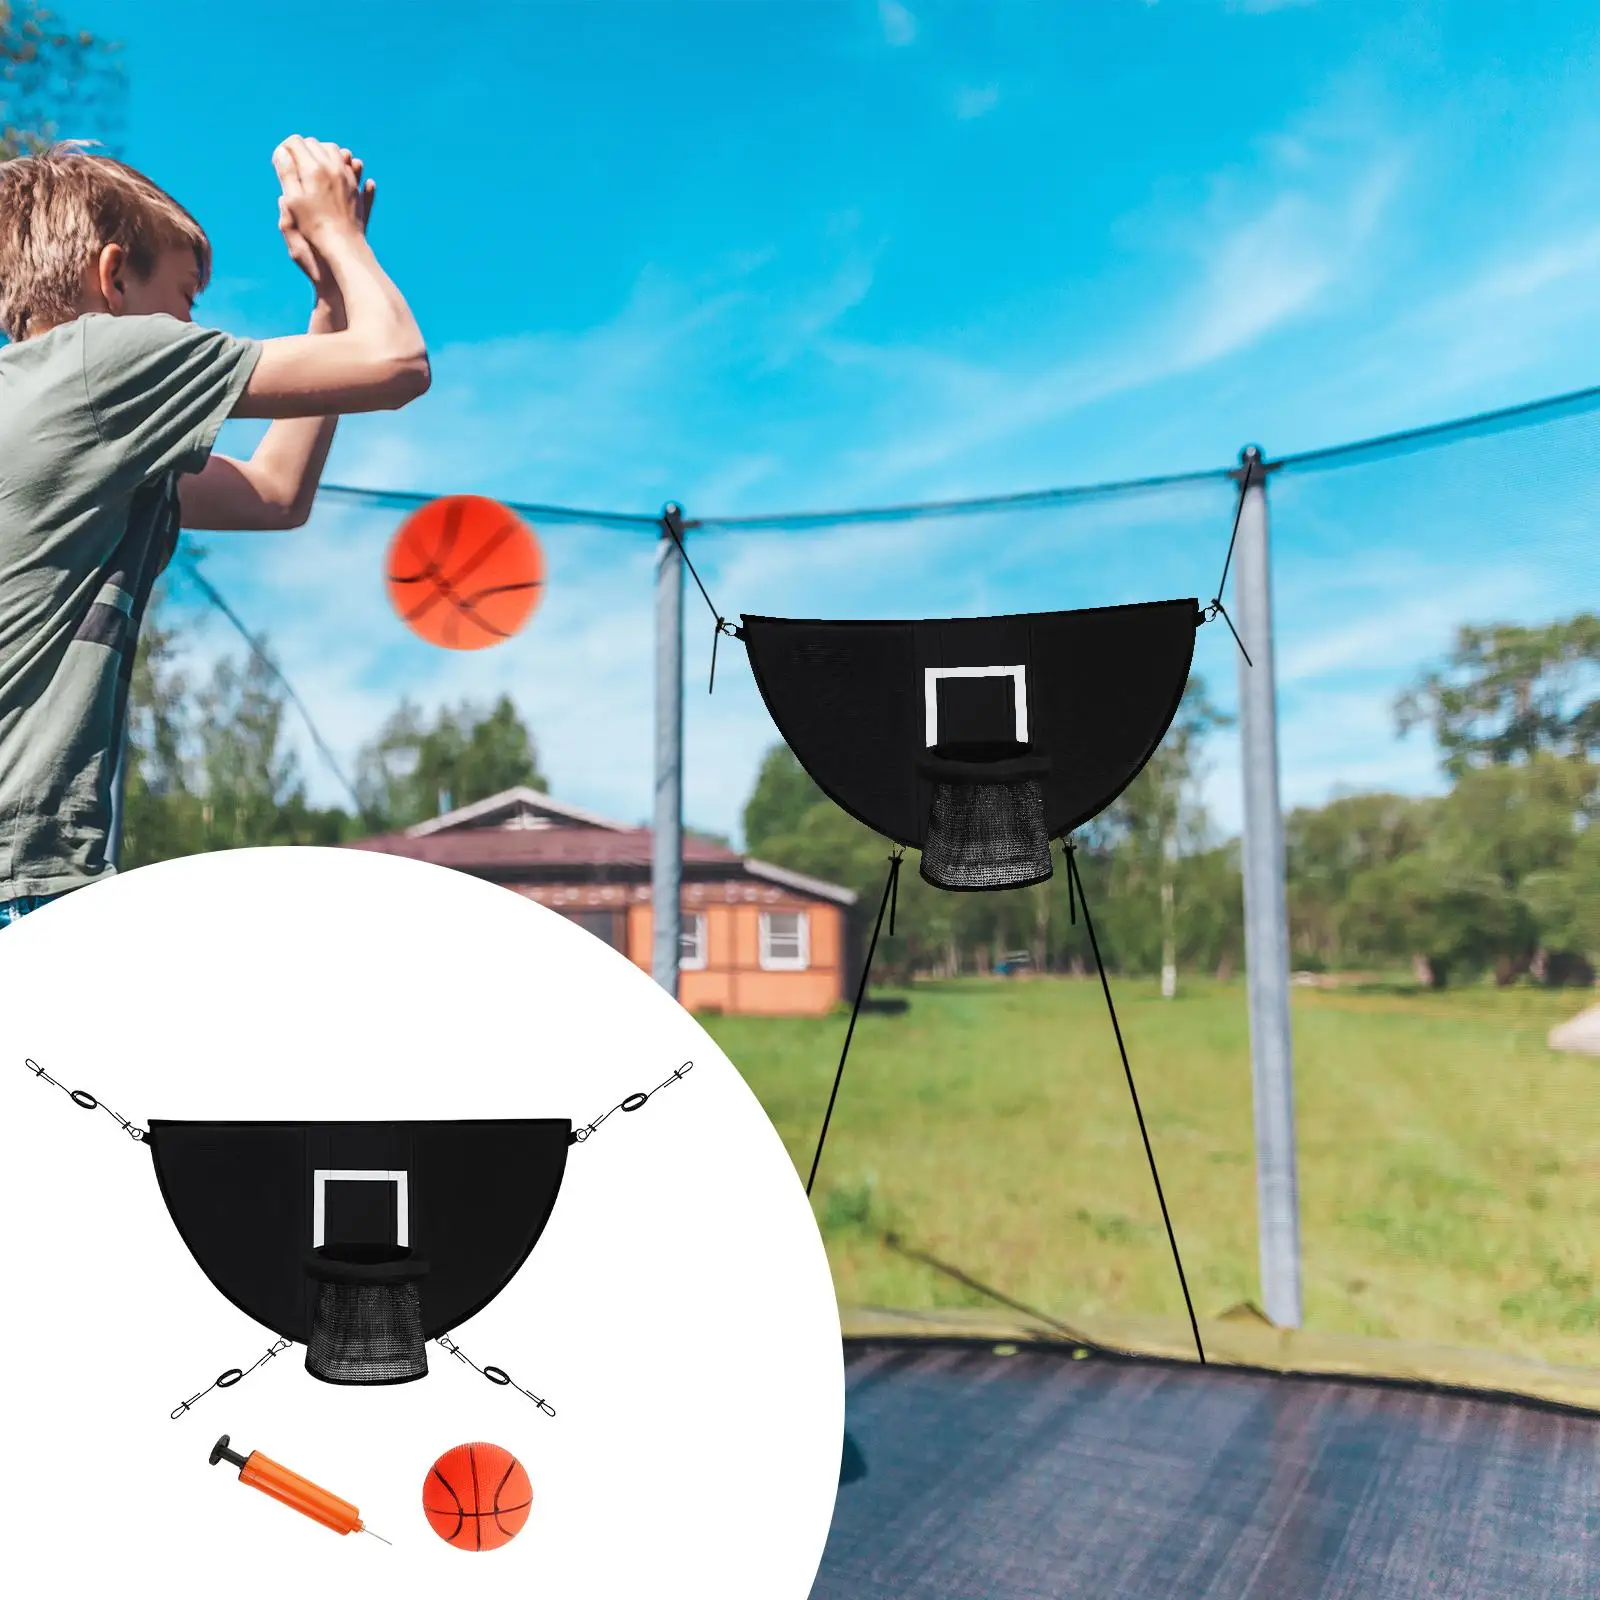 Mini Trampoline Basketball Hoop for Kids for Outdoor Easy Installation with Pump and Basketball Kids Trampoline Basketball Goal